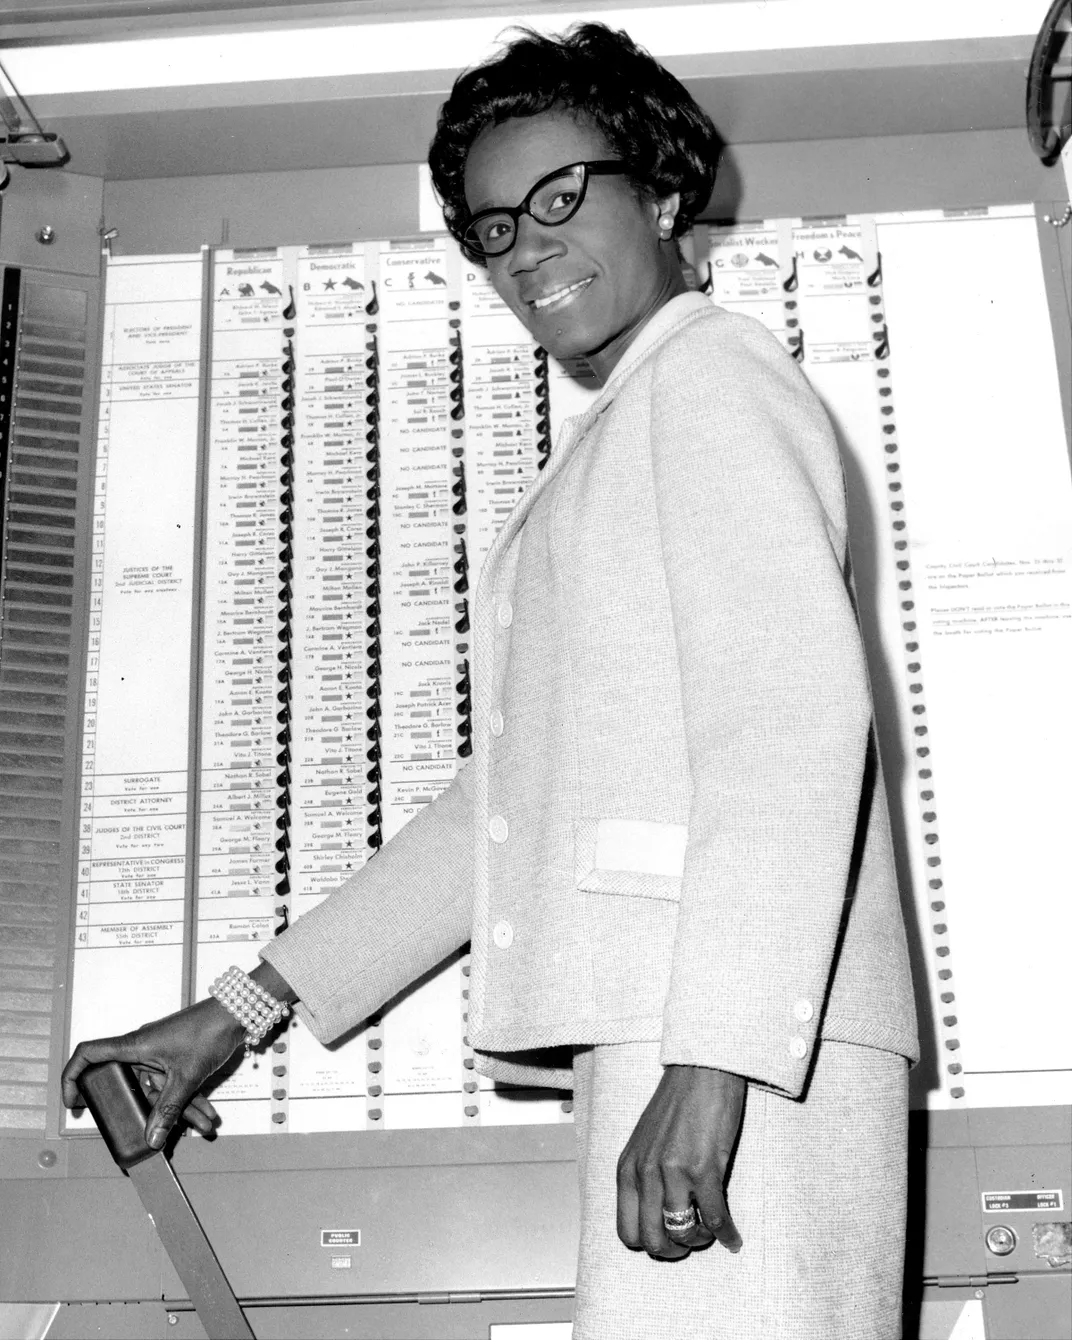 Chisholm in a voting booth